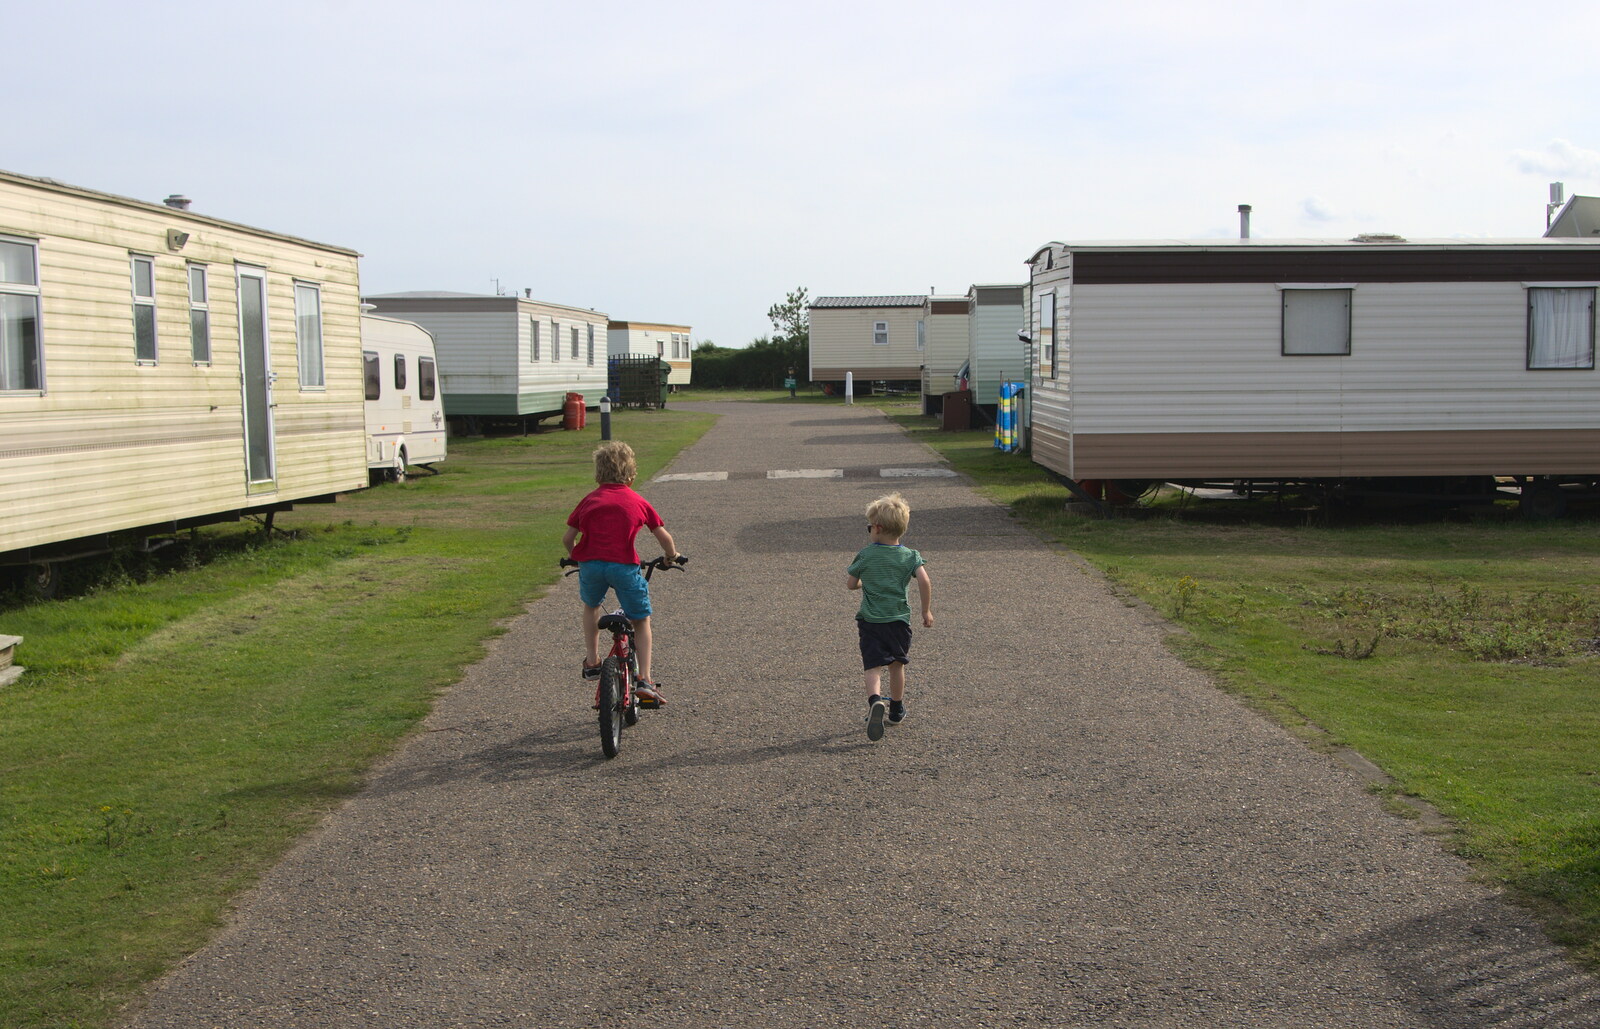 Fred and Harry roam around the camp site from The Danger of Trees: A Camping (Mis)adventure - Southwold, Suffolk - 3rd August 2015